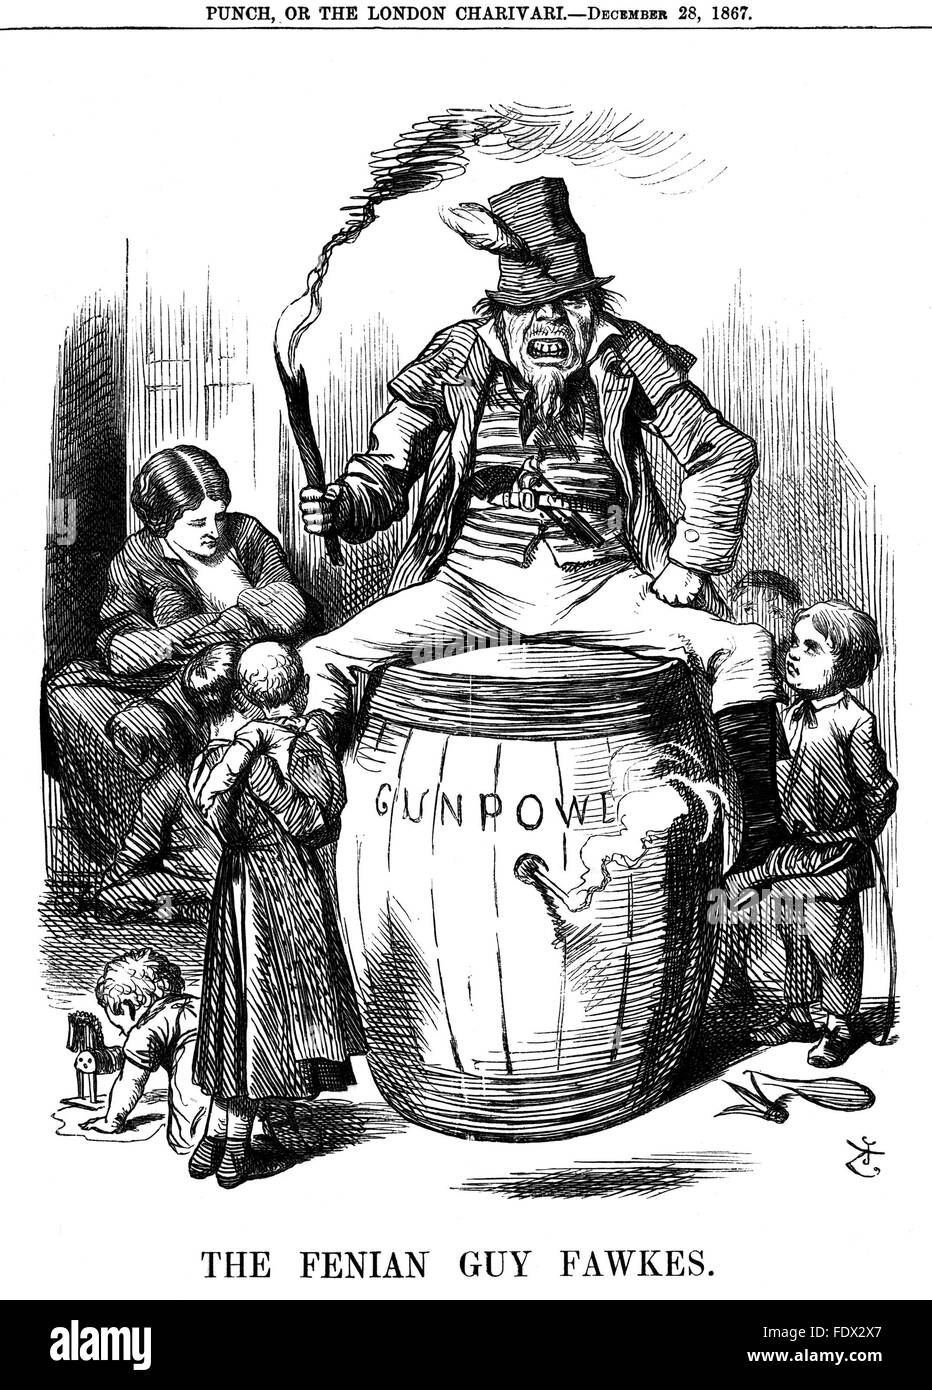 FENIAN GUY FAWKES cartoon from by John Tenniel published in Punch 28 December 1867 Stock Photo